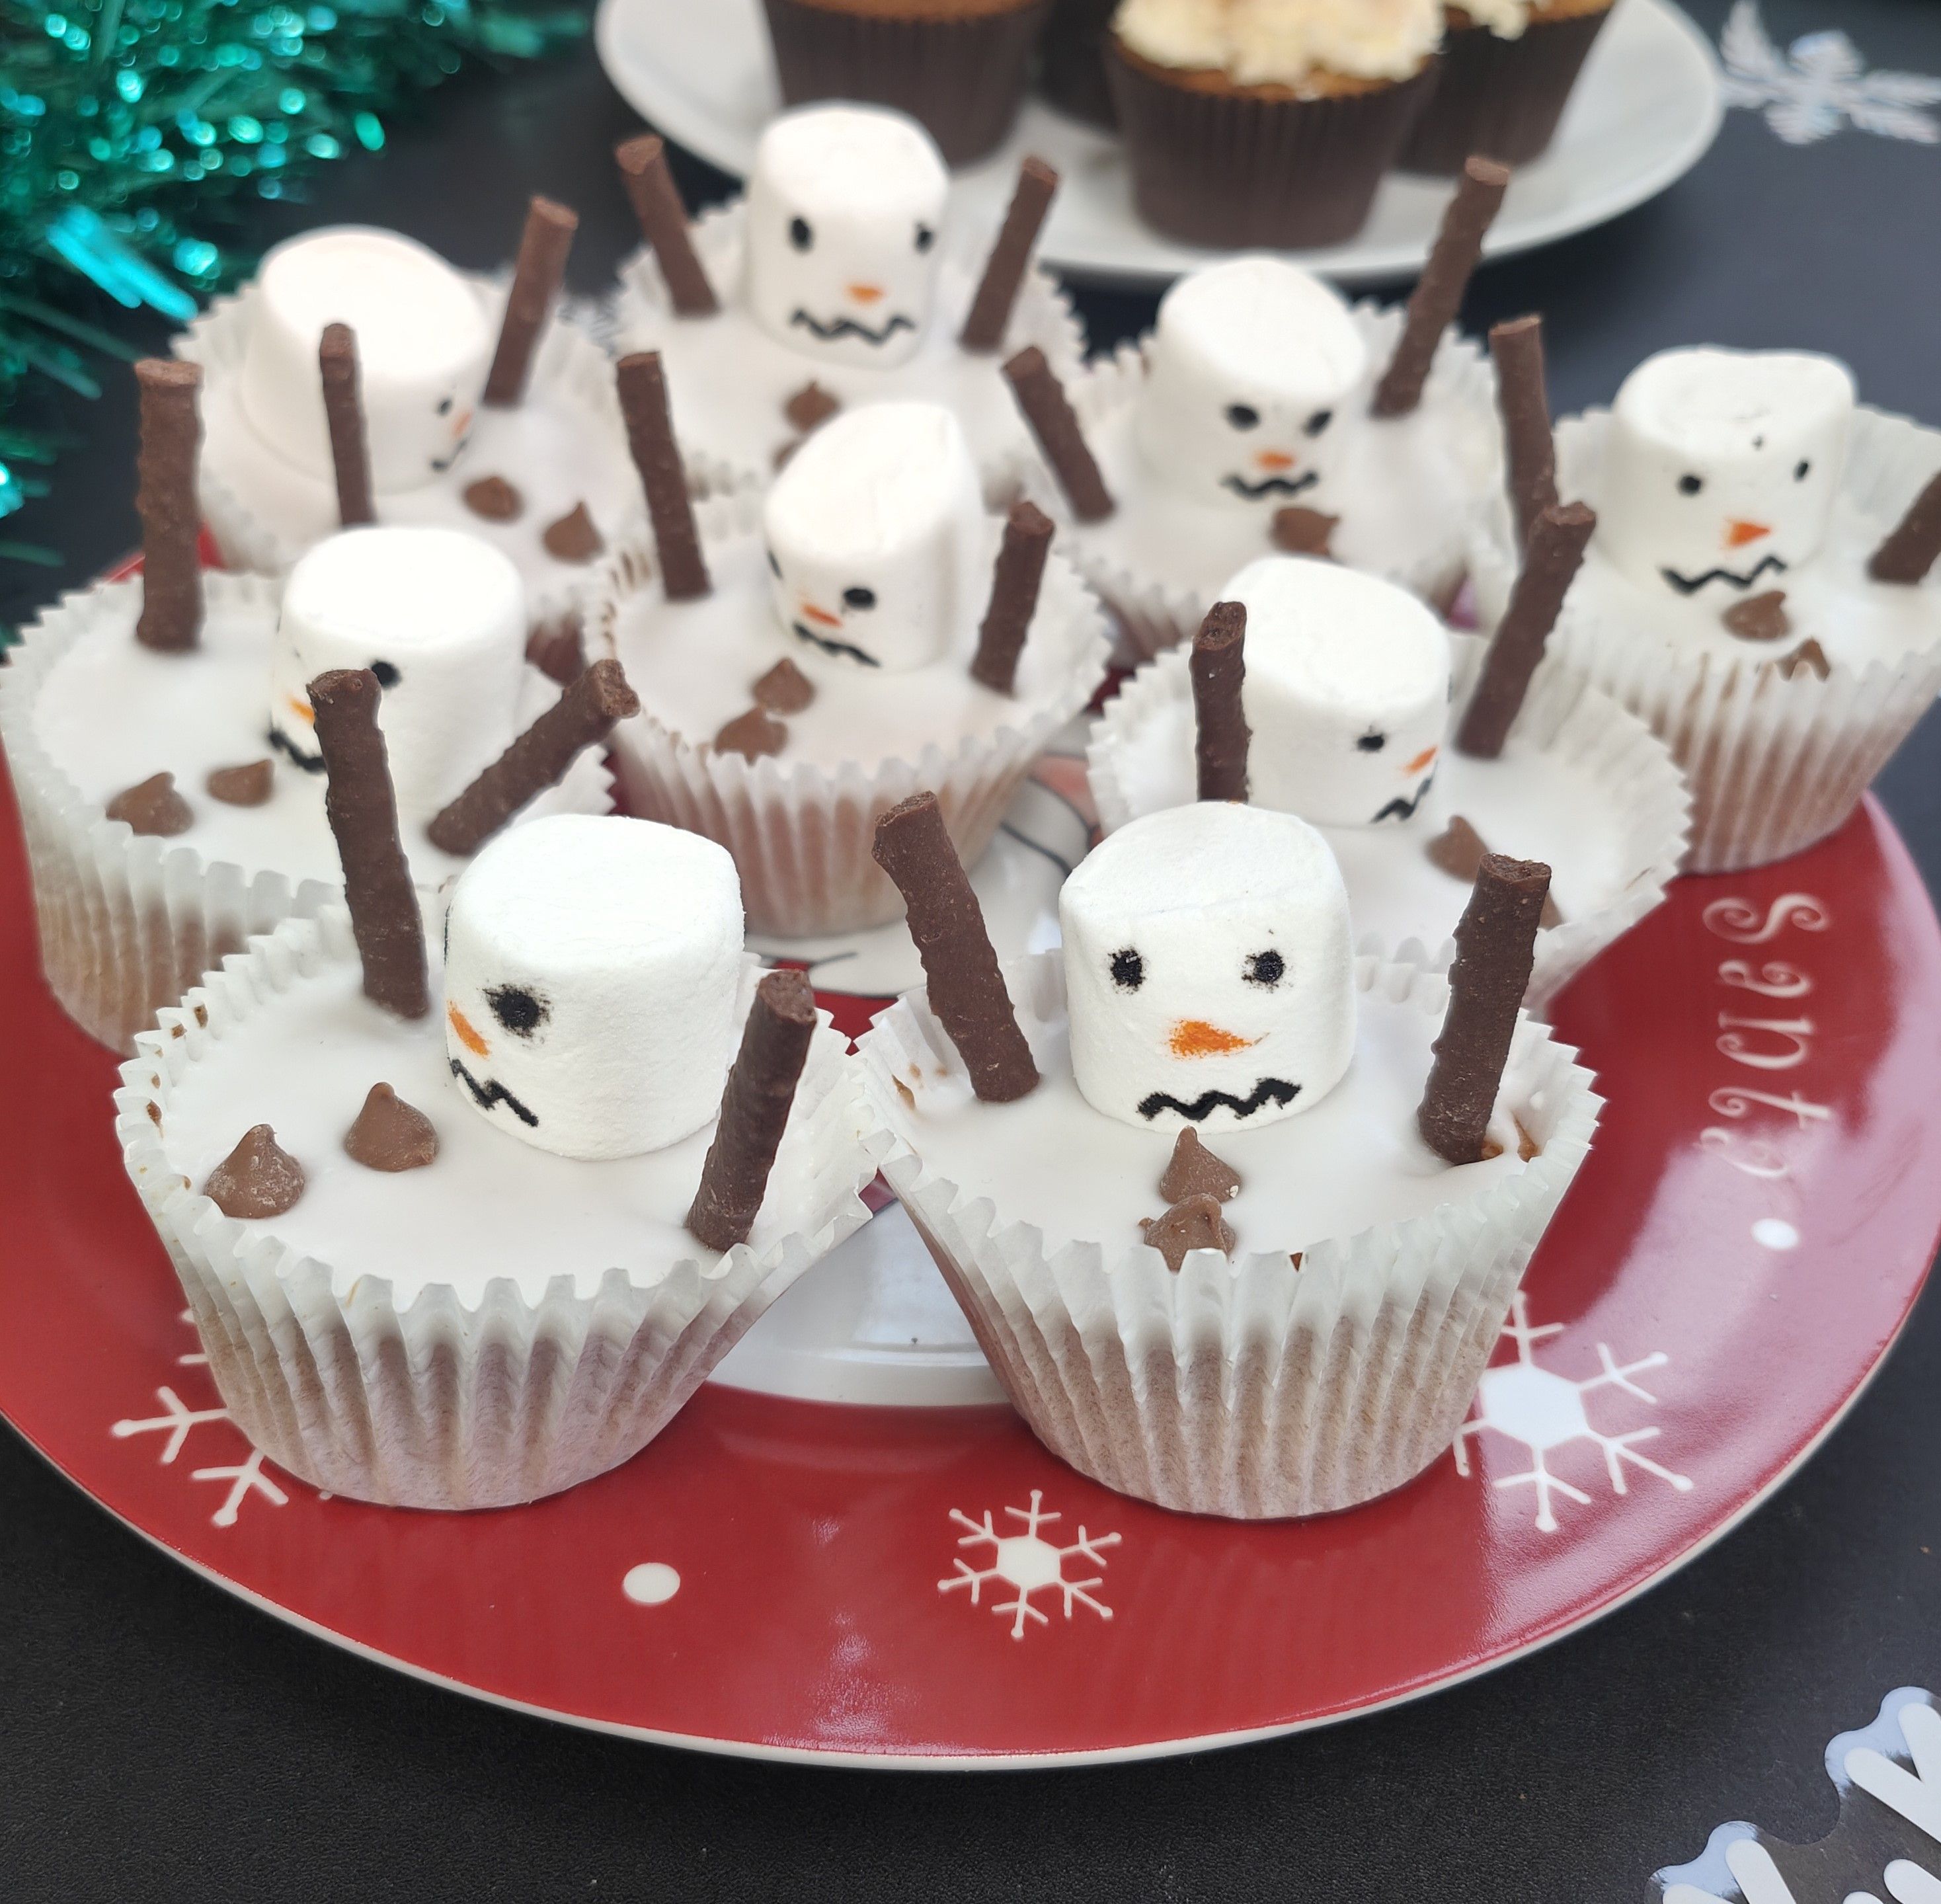 Snowman buns, bake off competition featured on xcl website newsletter